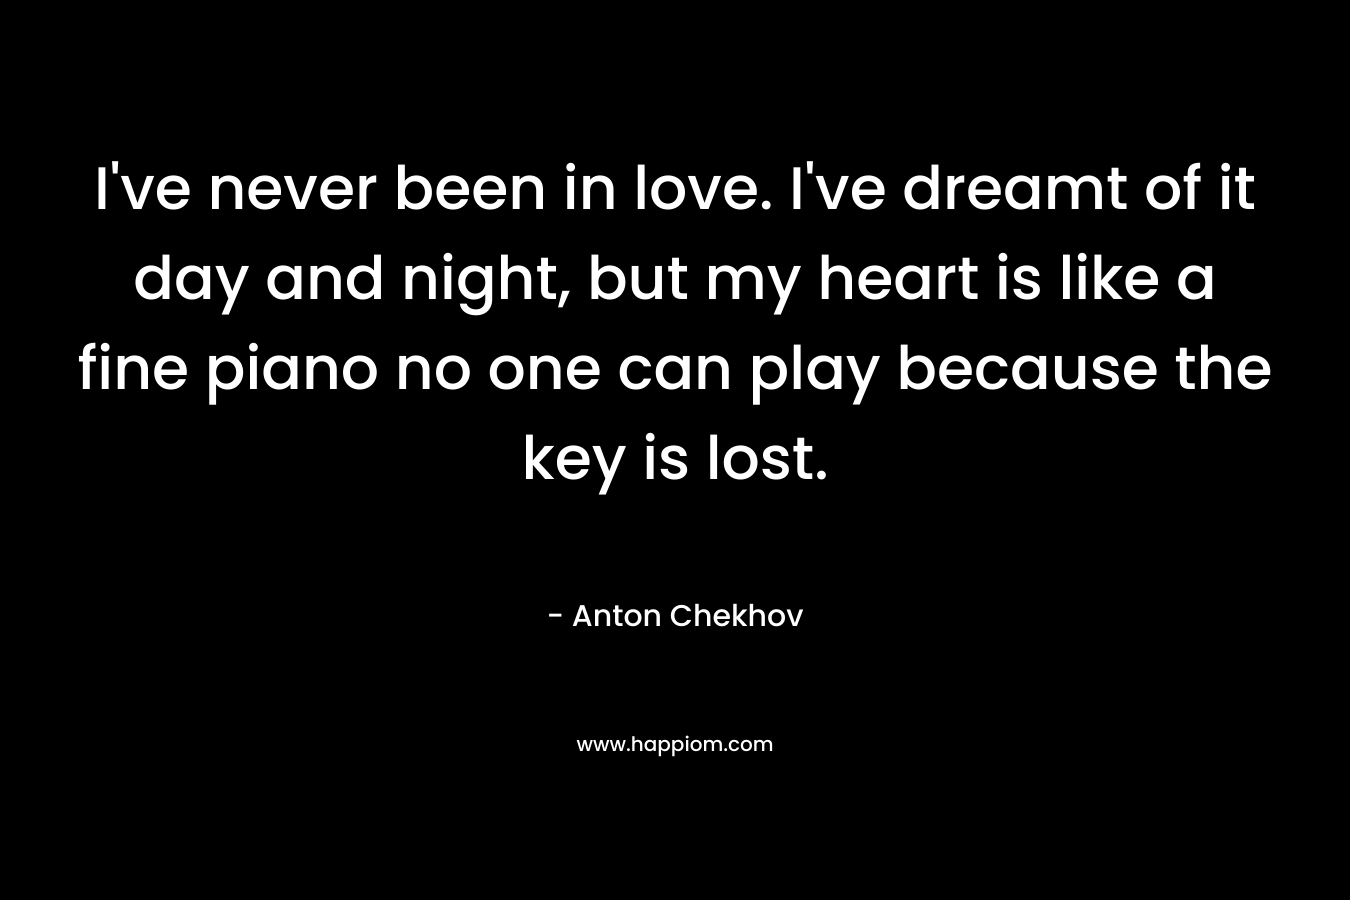 I’ve never been in love. I’ve dreamt of it day and night, but my heart is like a fine piano no one can play because the key is lost. – Anton Chekhov